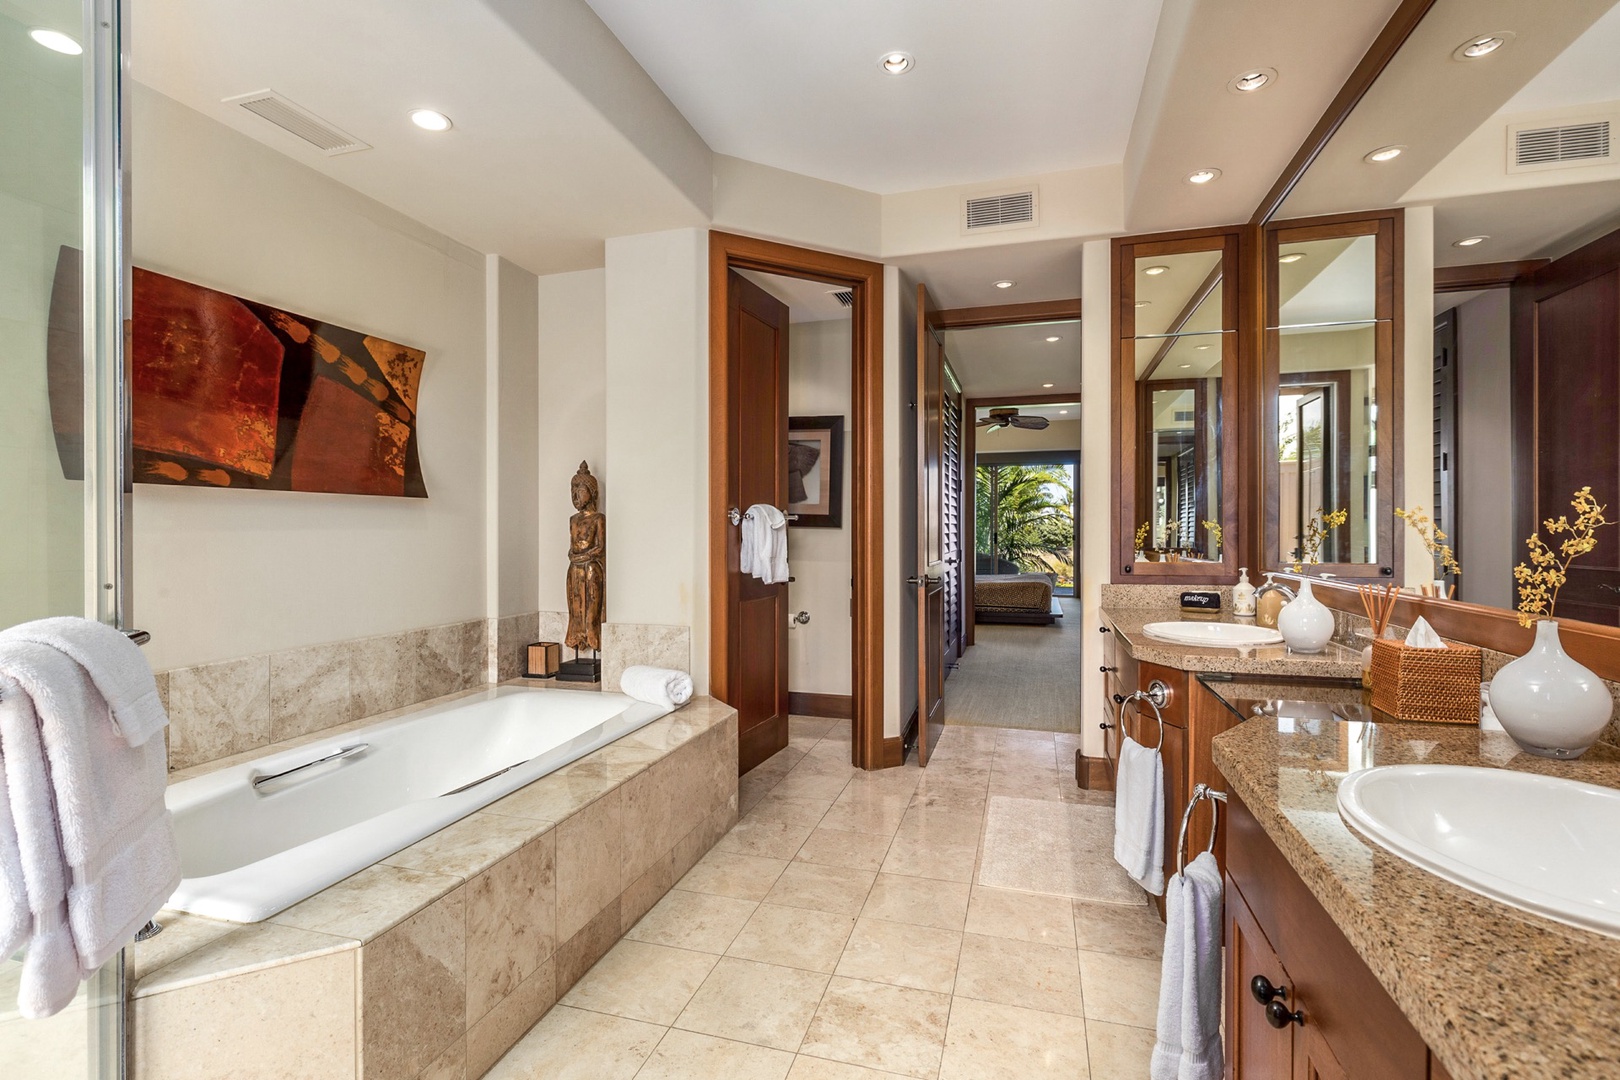 Kailua Kona Vacation Rentals, 3BD Ka'Ulu Villa (131C) at Four Seasons Resort at Hualalai - Primary bath with dual vanity, oval soaking tub, separate walk-in shower, private w/c and outdoor shower garden.